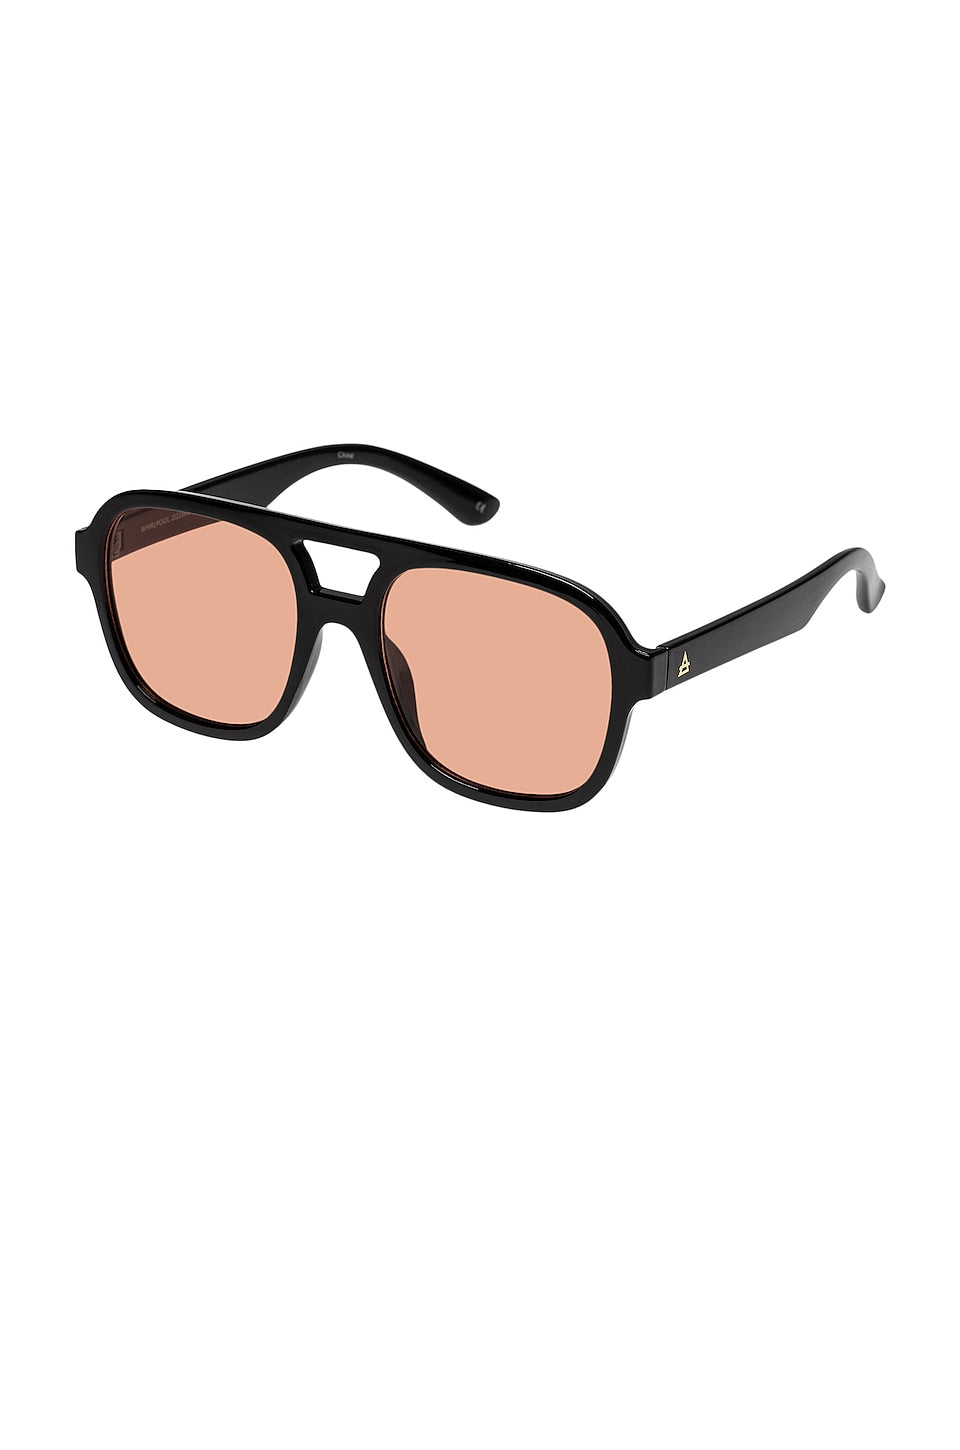 AIRE Whirlpool Sunglasses in Black & Tan Tint